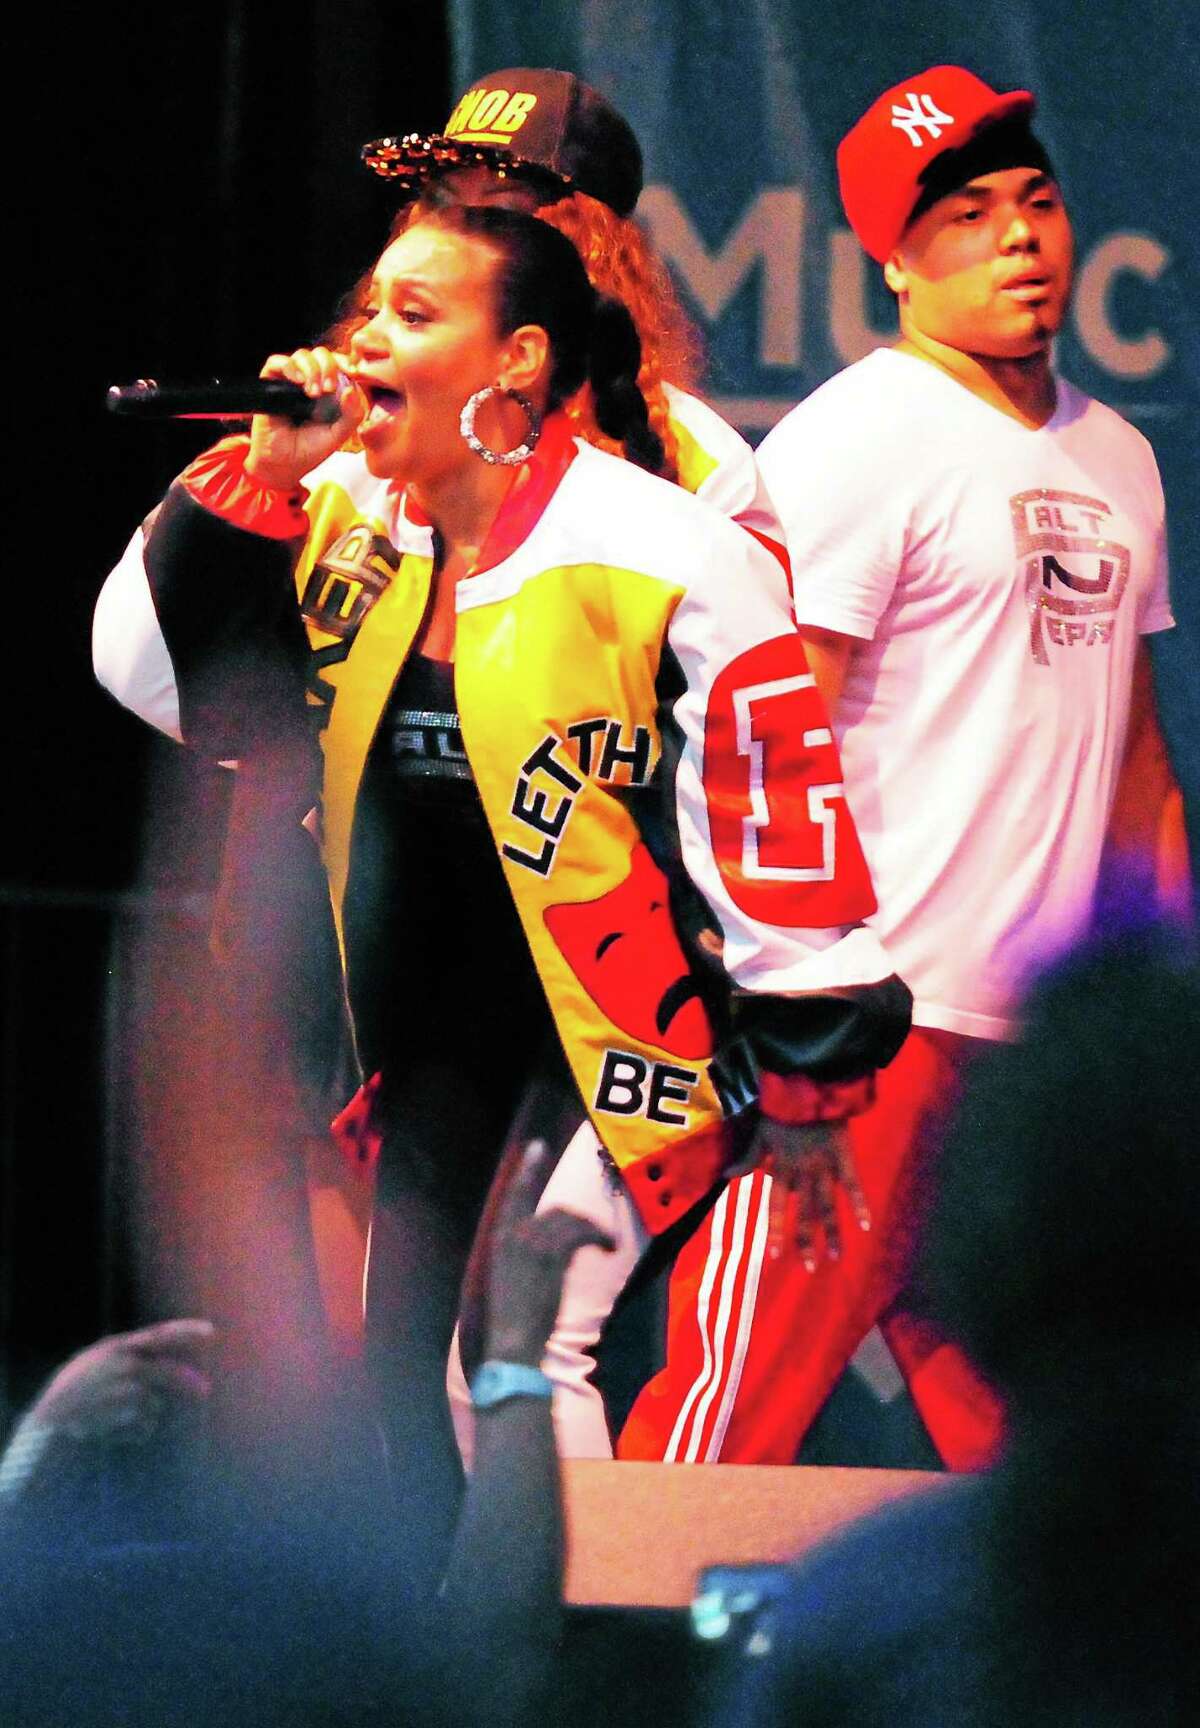 Crowds filled the New Haven Green Saturday night to see hip-hop artists Salt-N-Pepa perform as part of the Music on the Green concert series.